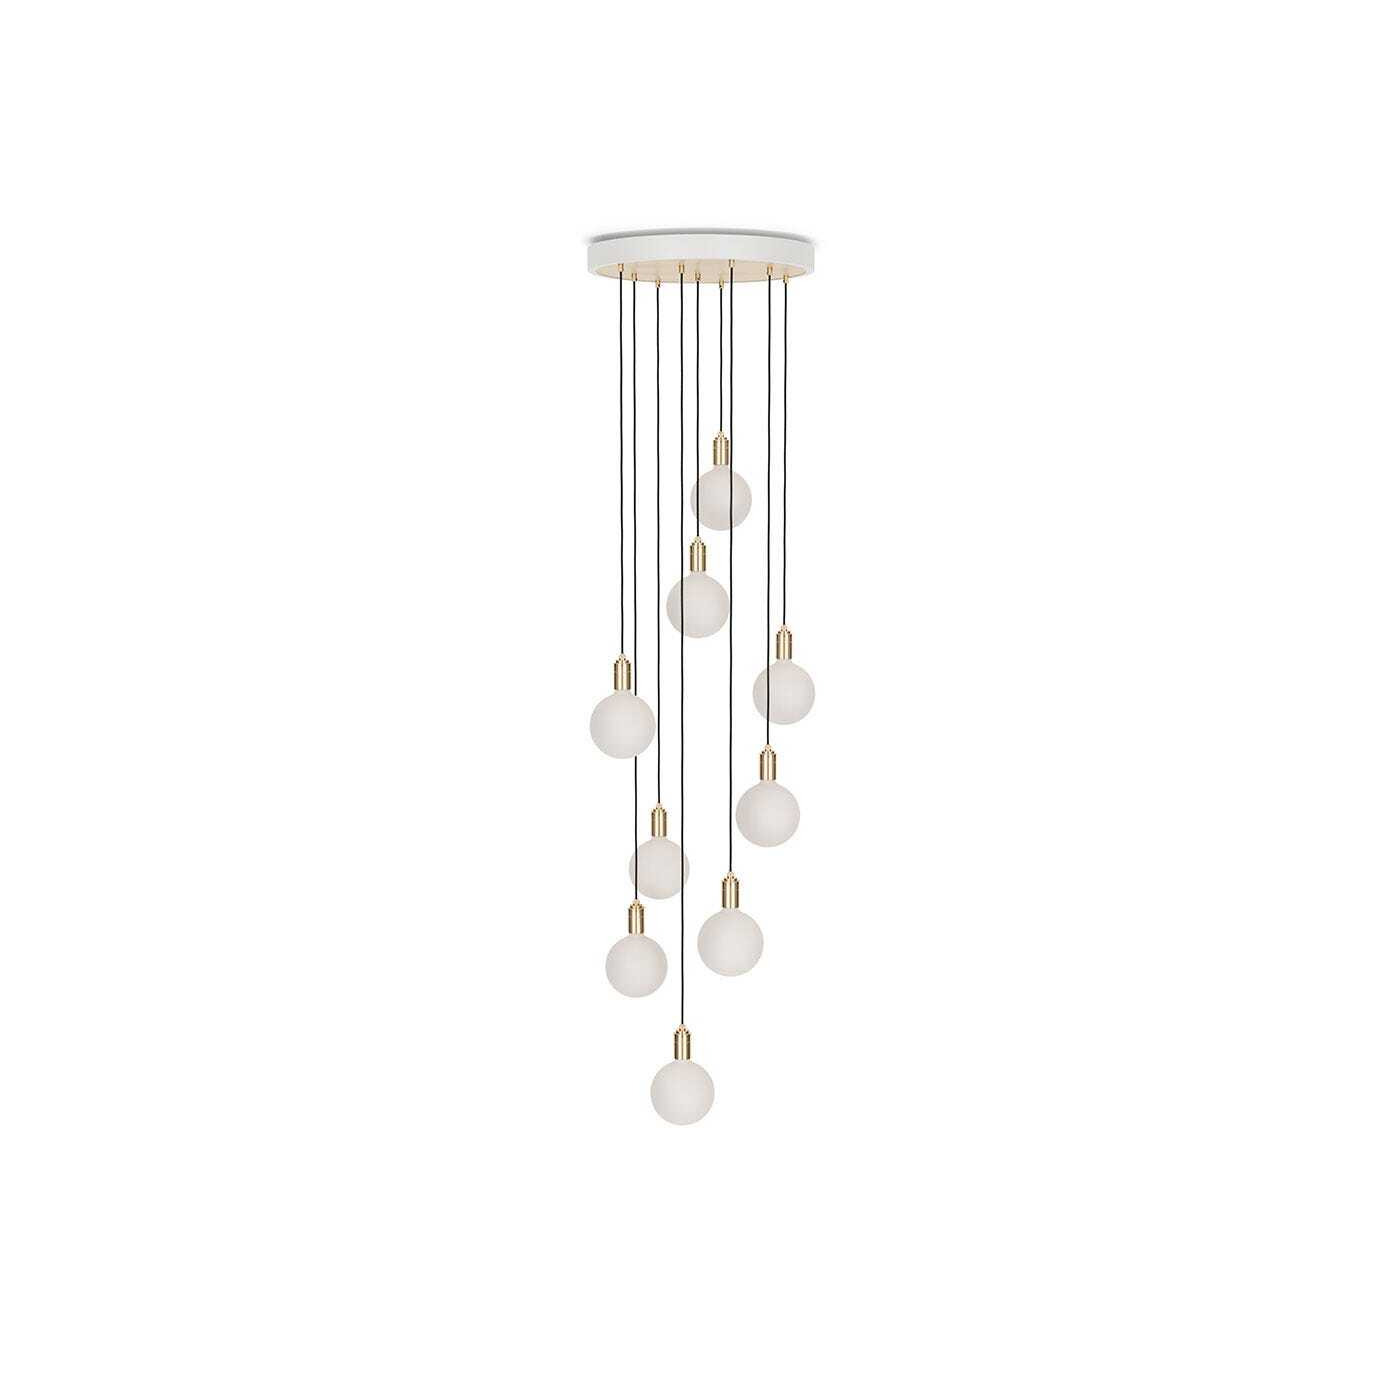 Tala Large White Canopy With 9 Brass Pendants and 9 Sphere IV Bulbs - image 1